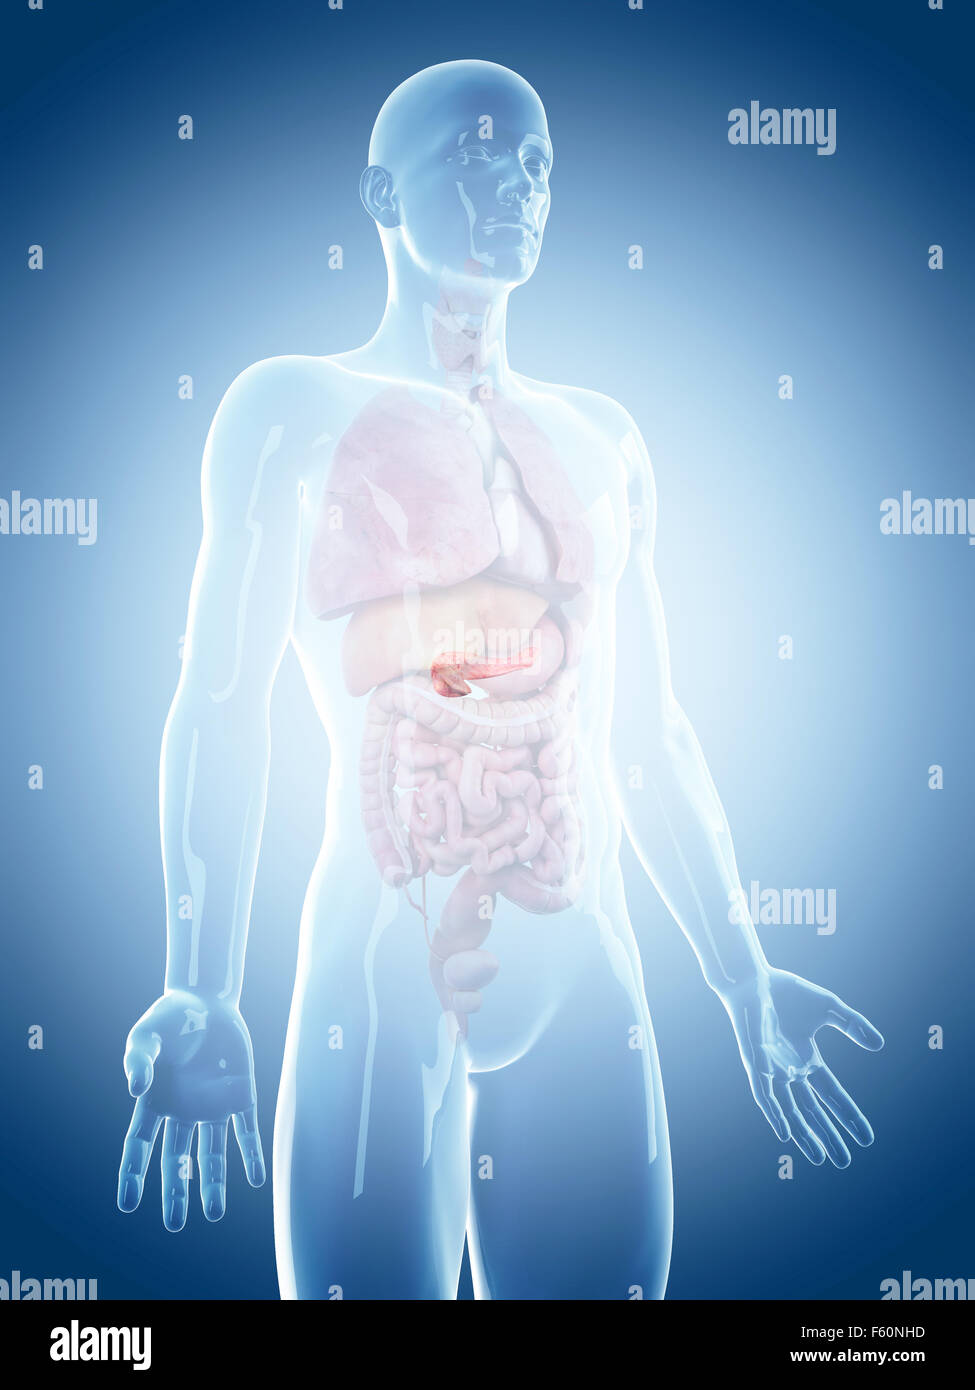 medically accurate illustration of the pancreas Stock Photo